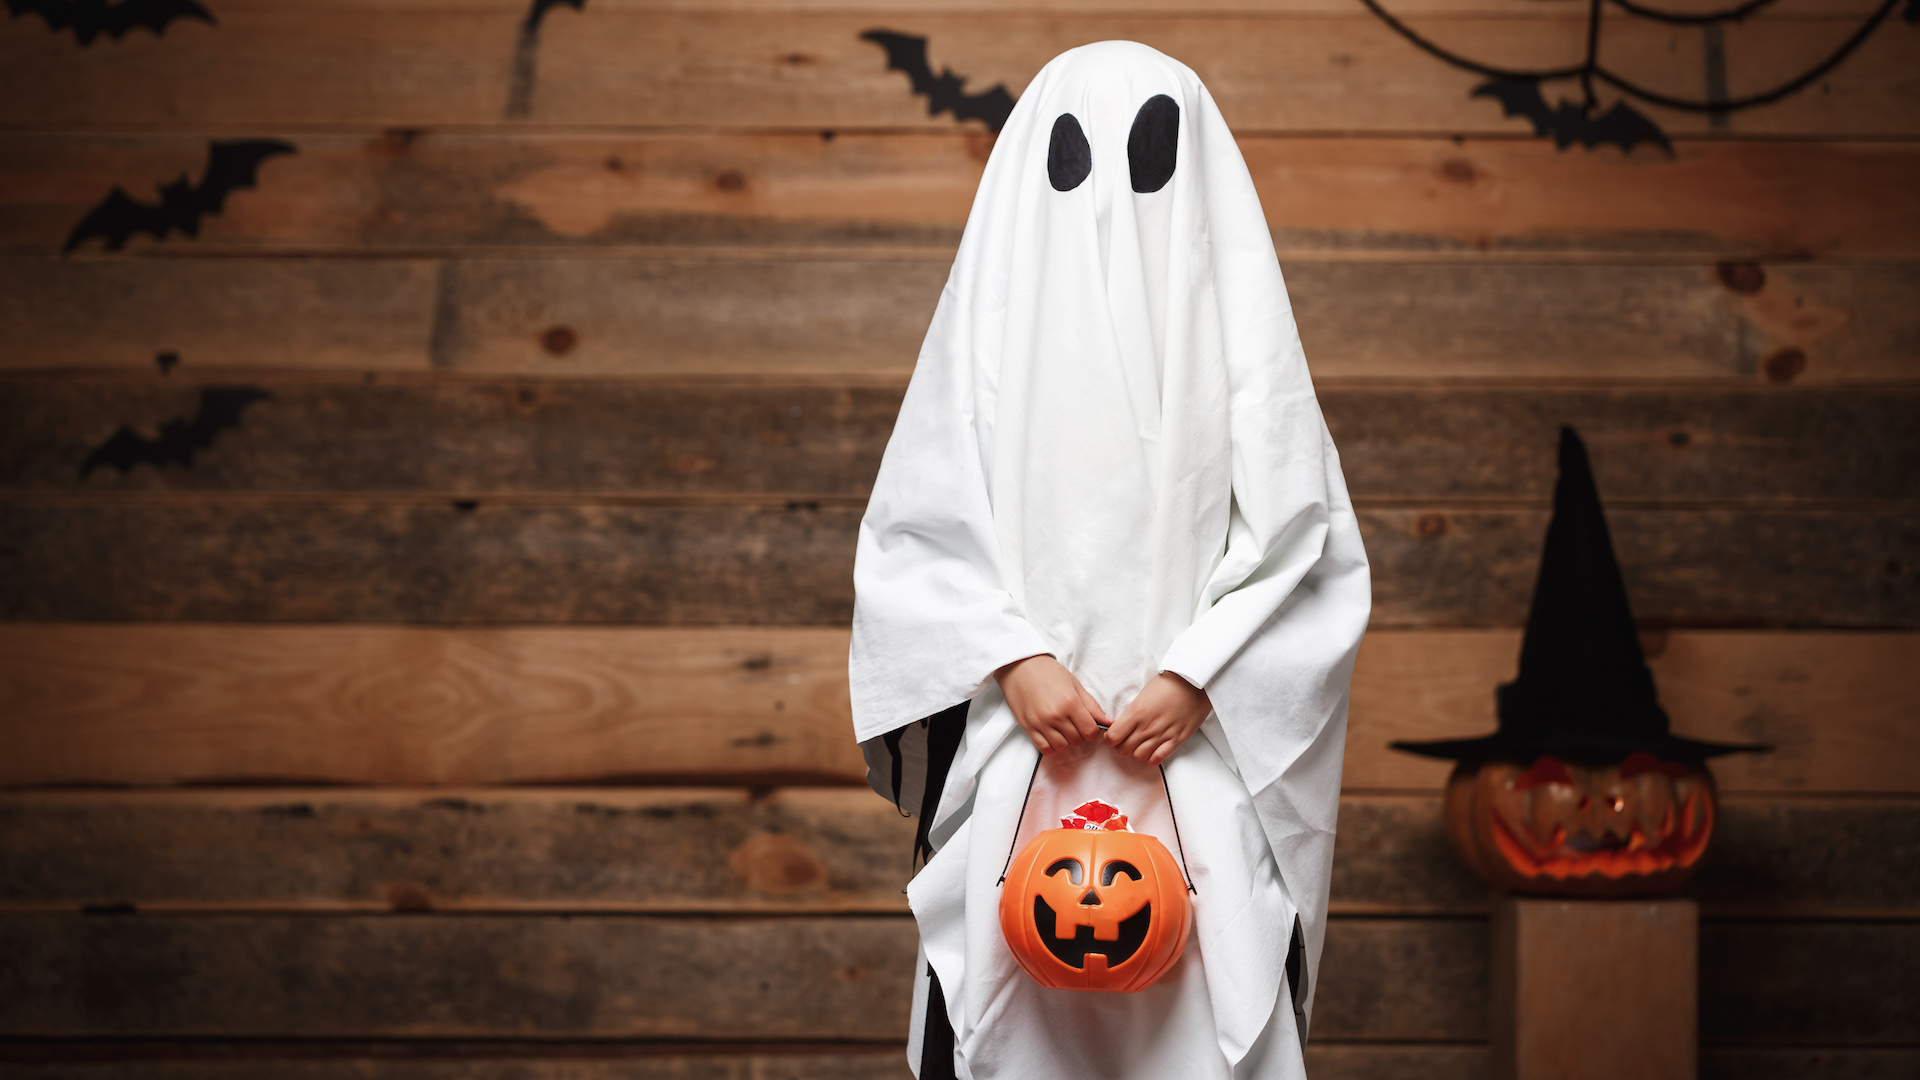 A child dressed as a ghost for Halloween